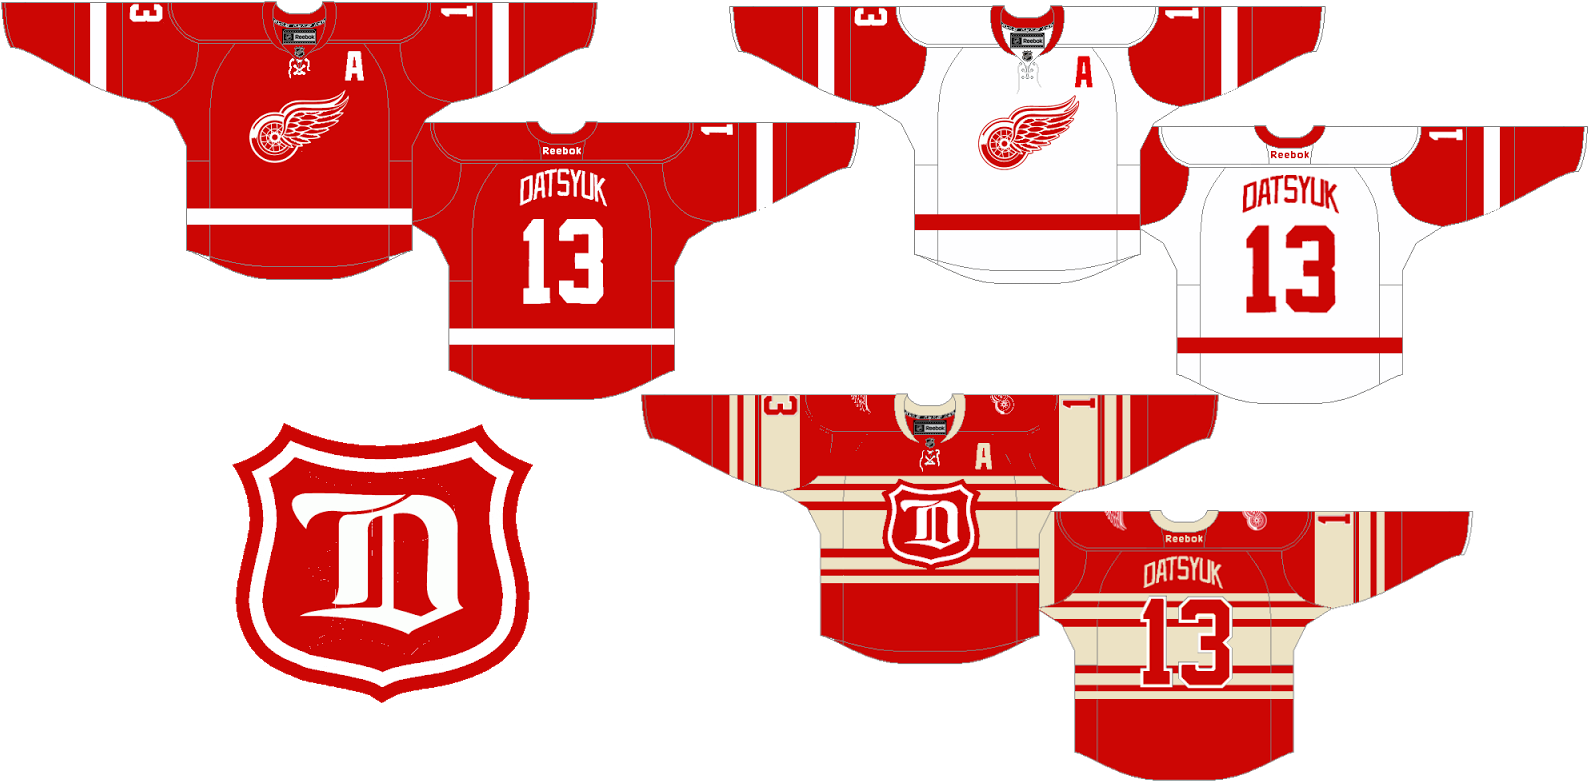 A Collage Of Red And White Jerseys